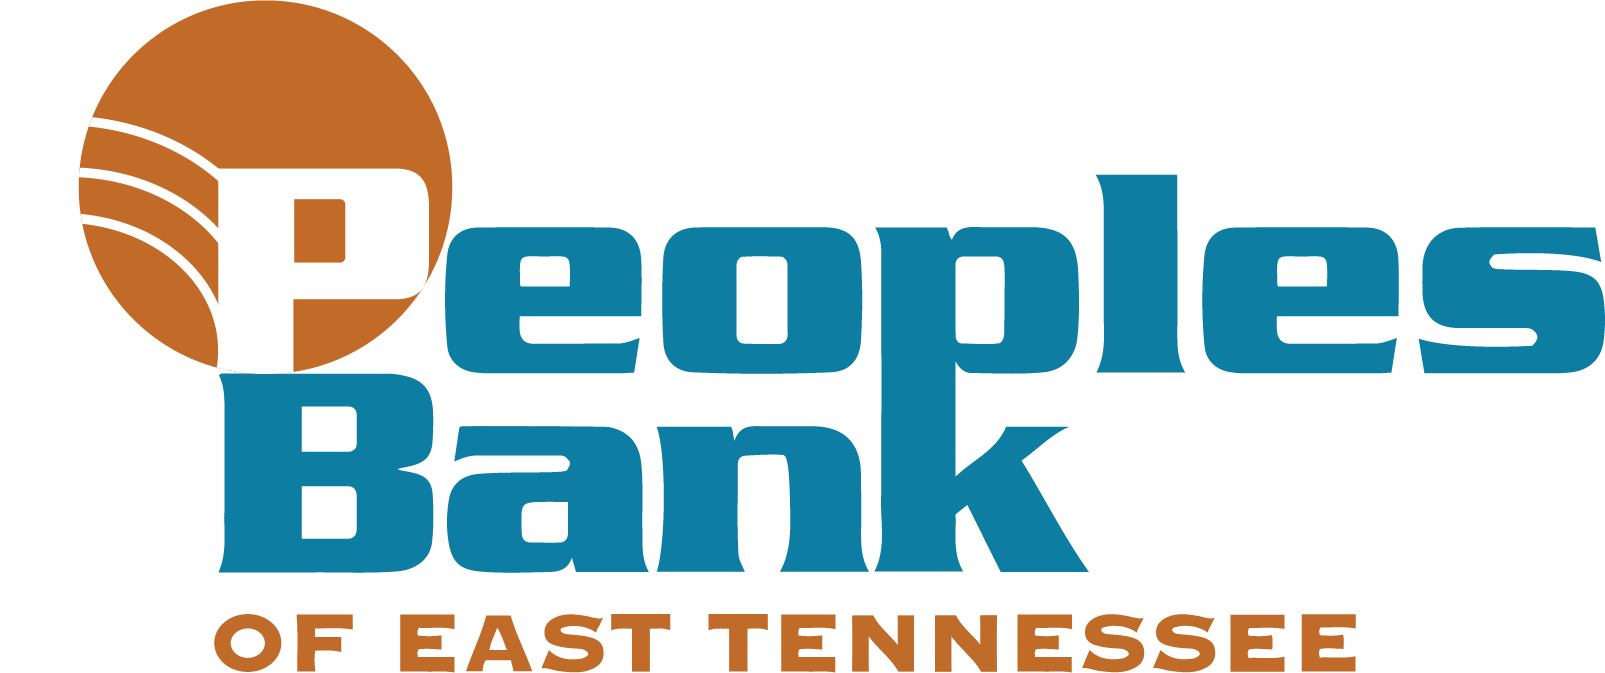 Contact Peoples Bank of East Tennessee